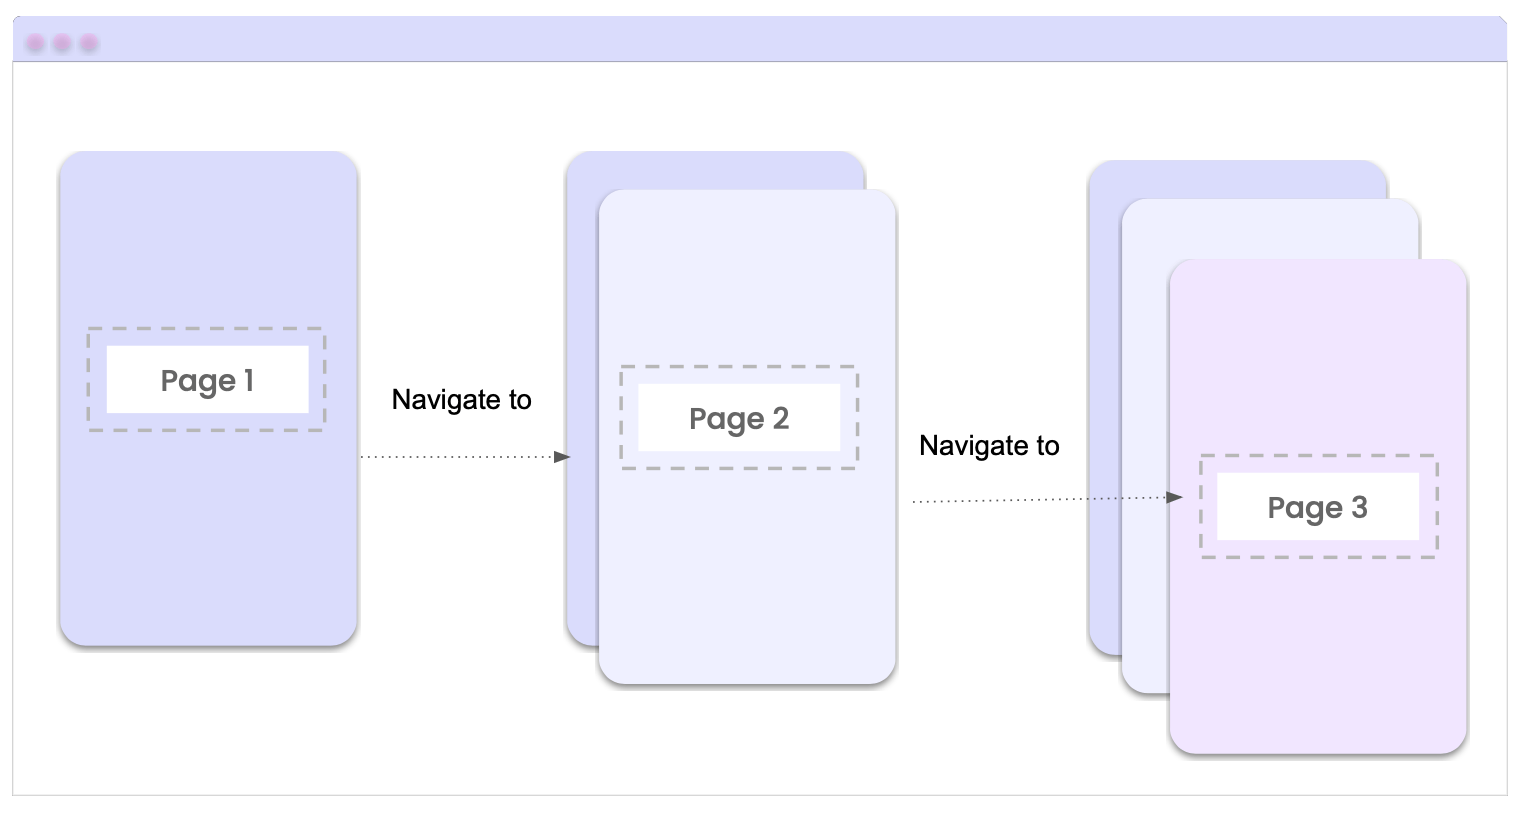 Page 1 – navigate to – page 2 – navigate to page 3. Each stacked on the top of the previous